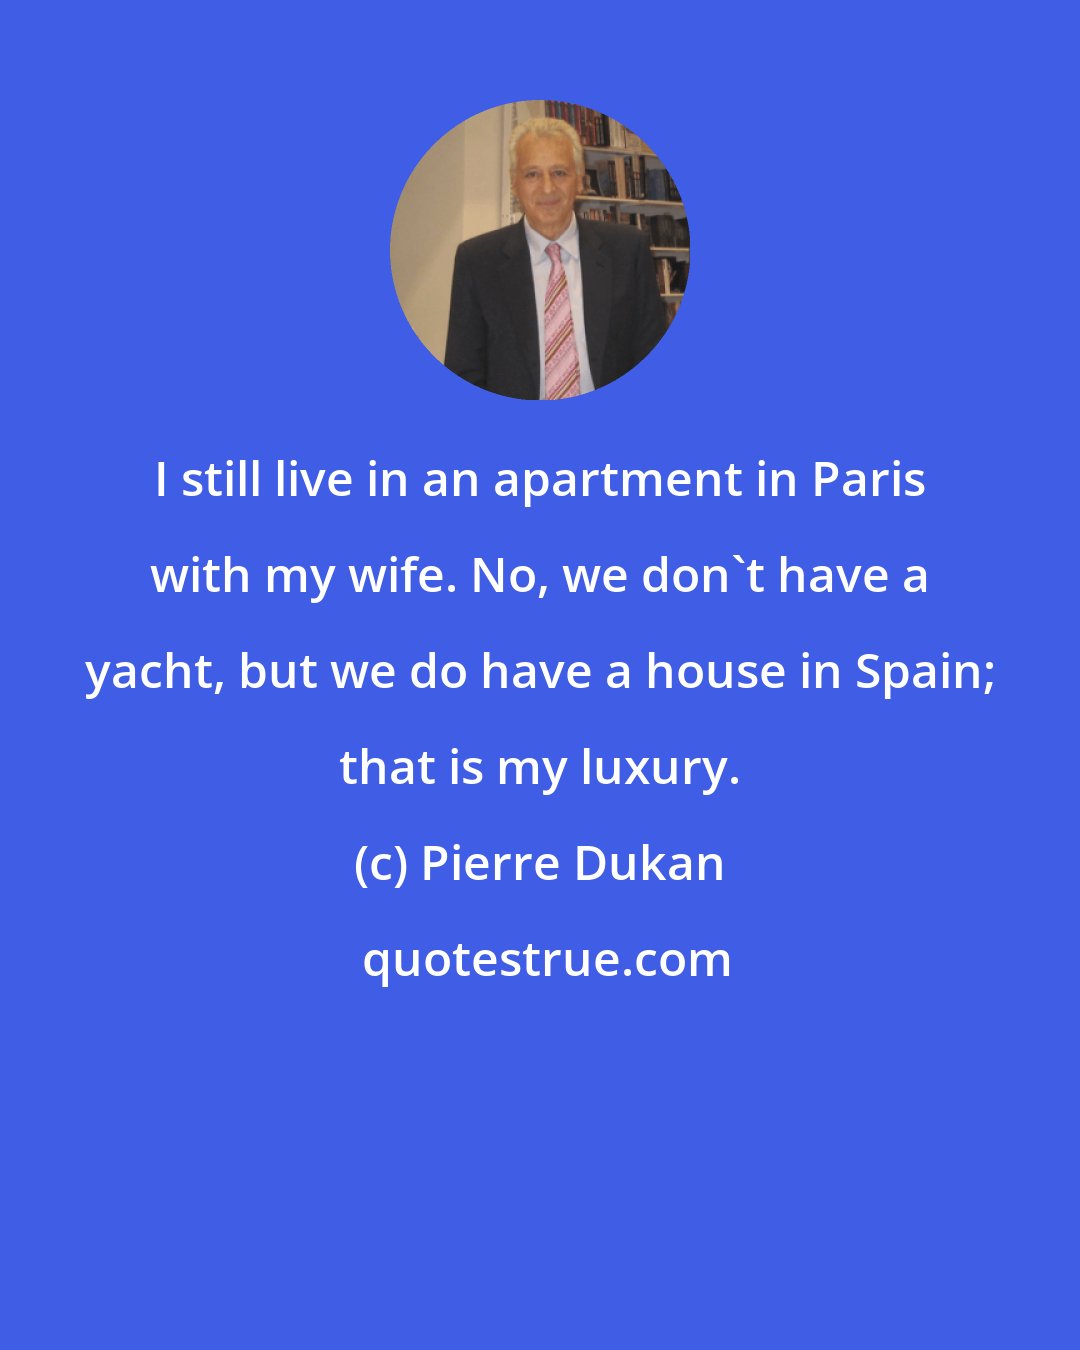 Pierre Dukan: I still live in an apartment in Paris with my wife. No, we don't have a yacht, but we do have a house in Spain; that is my luxury.